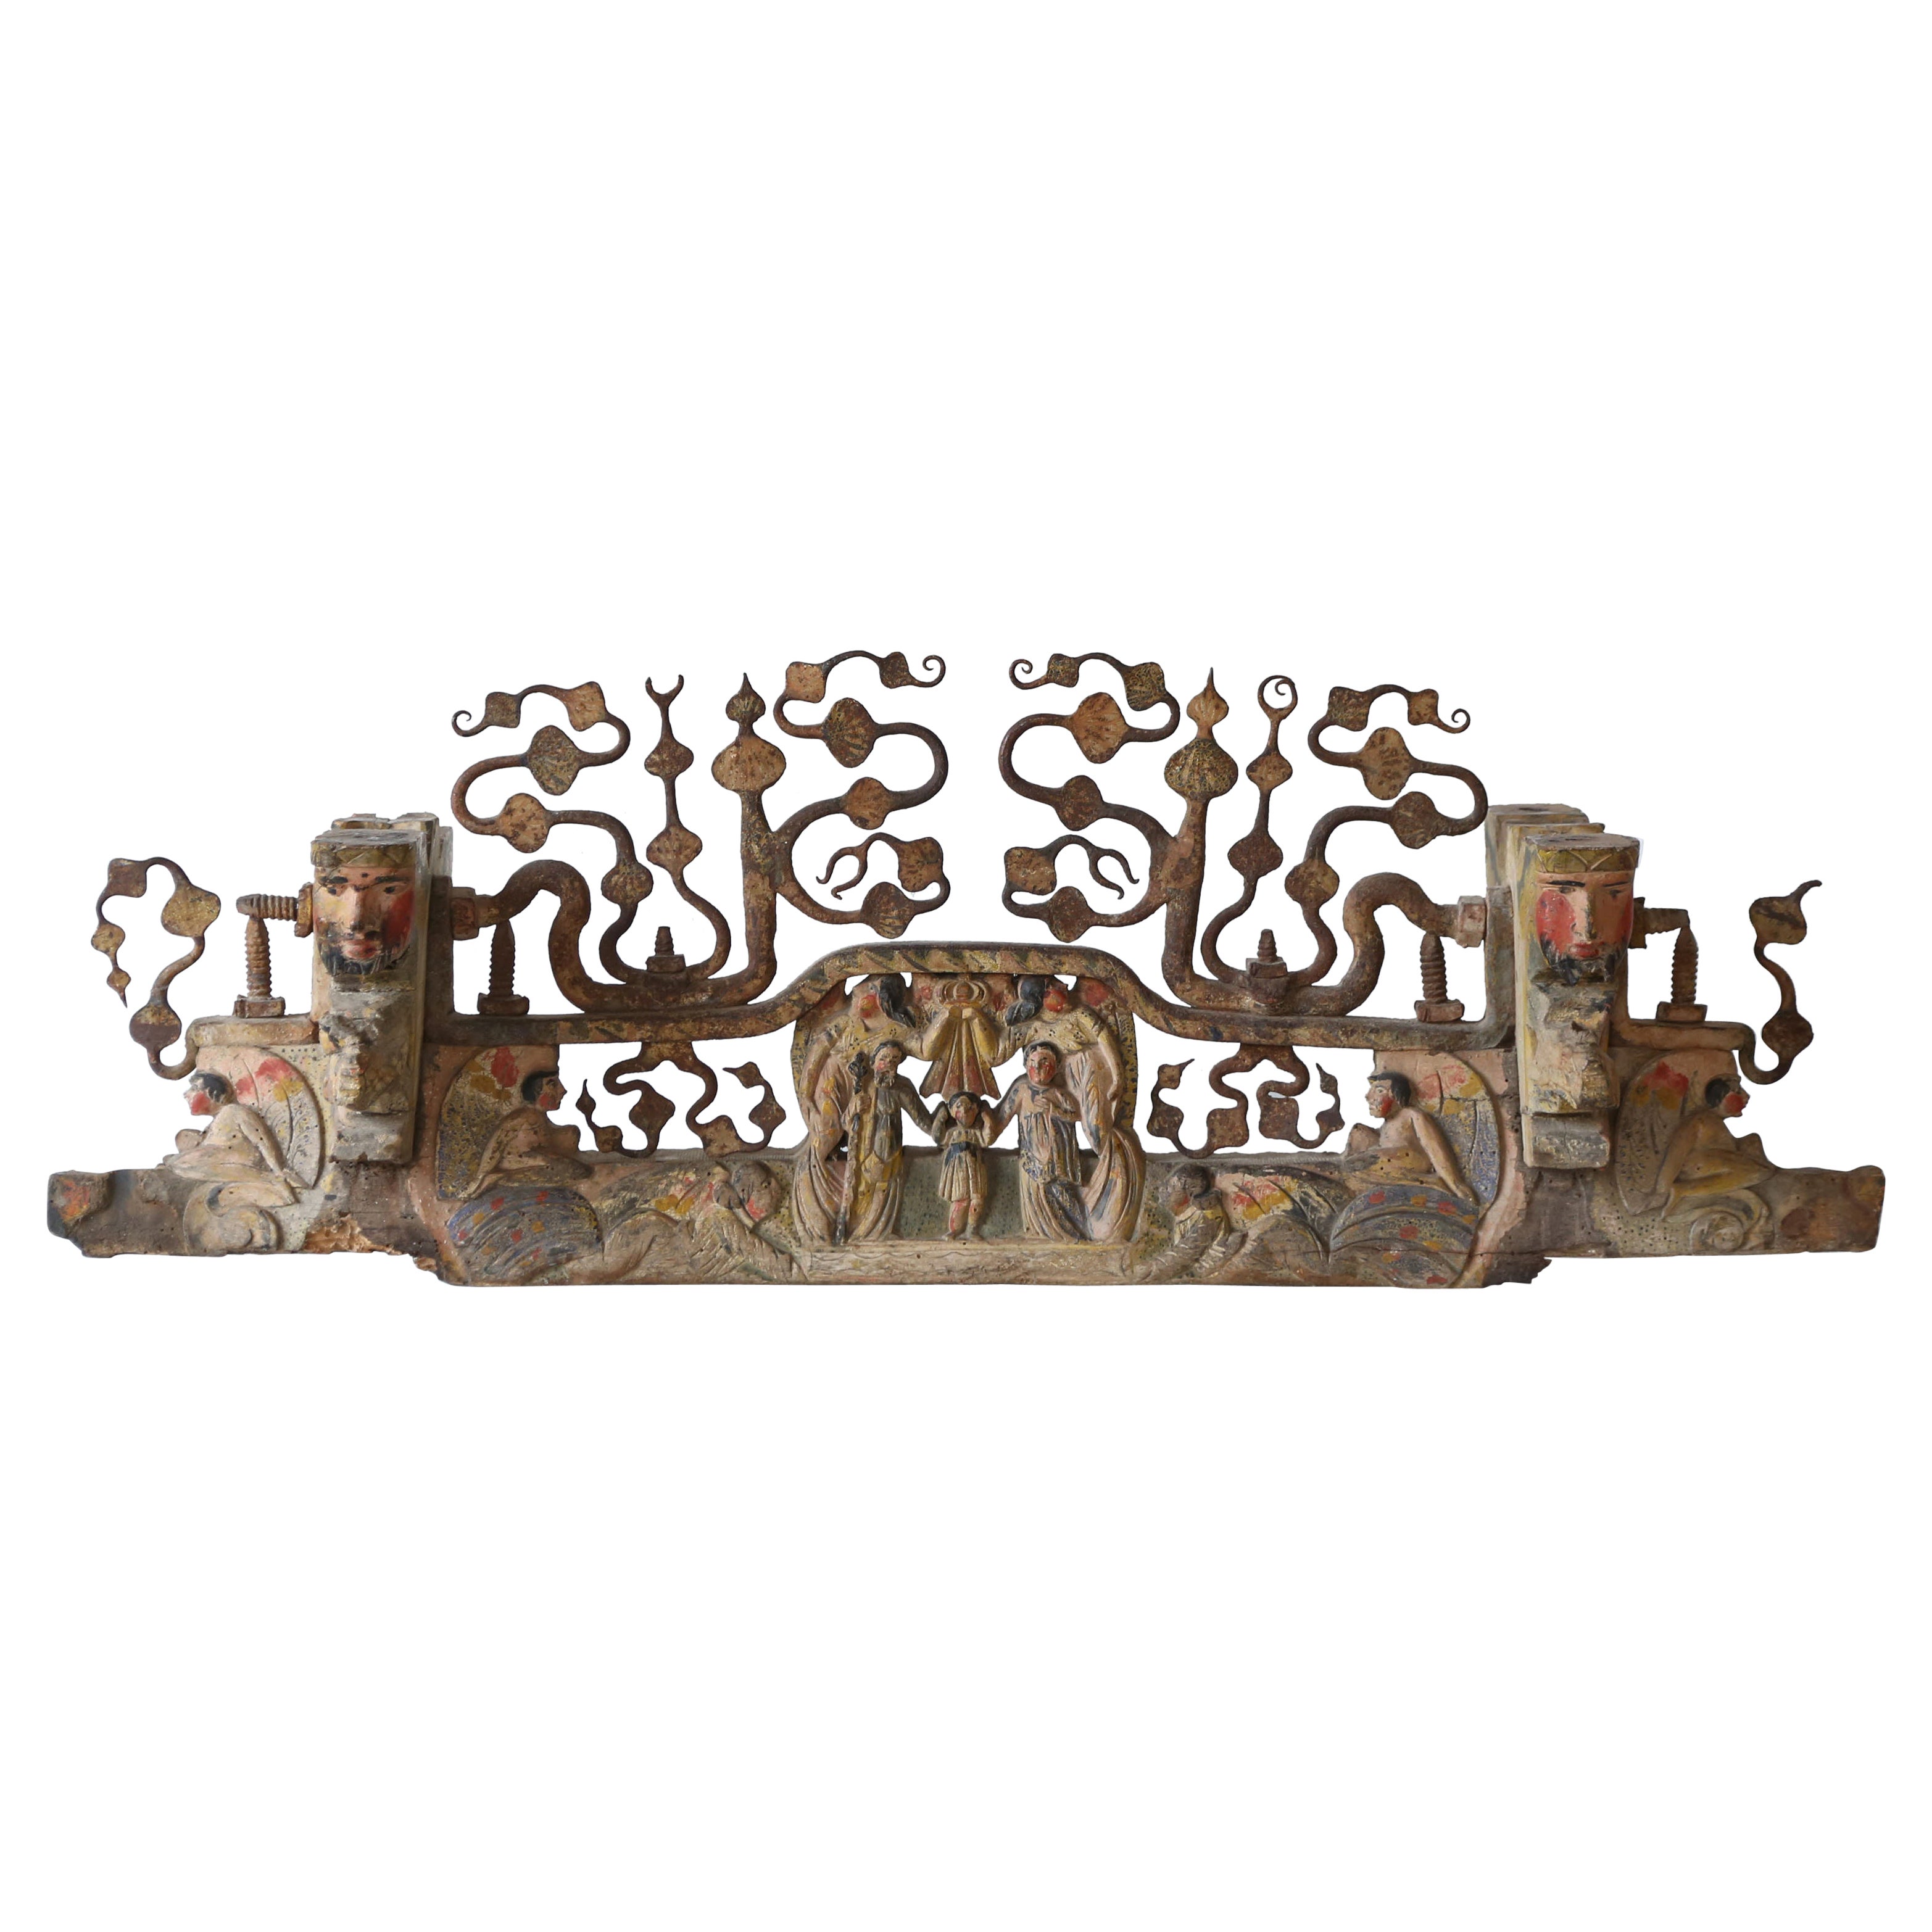 A Hand Crafted Carriage Piece, Palermo, Sicily, Italy, 19th Century